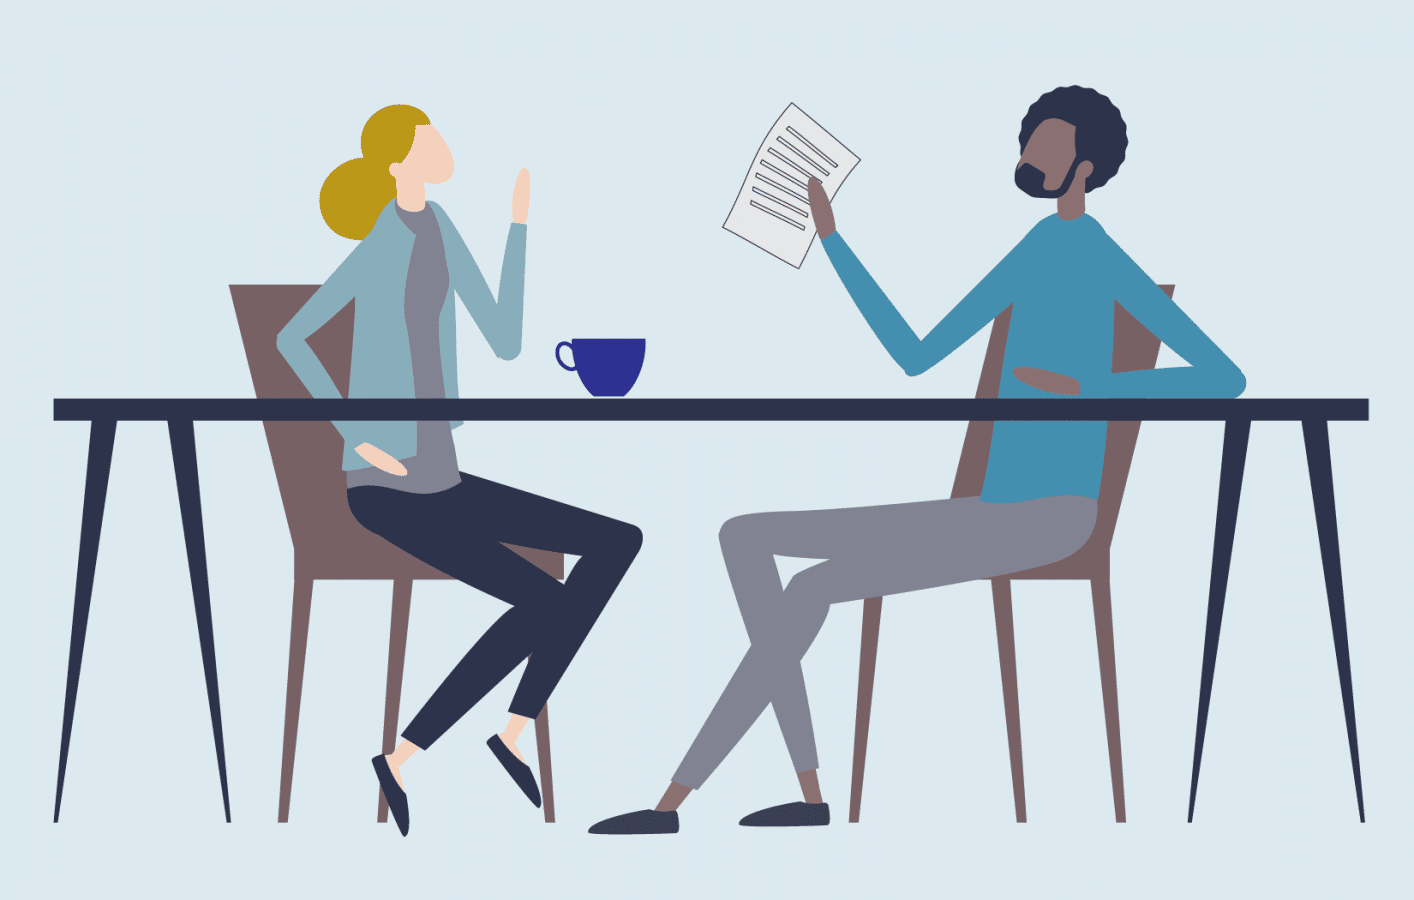 Illustration of two people talking together at a table